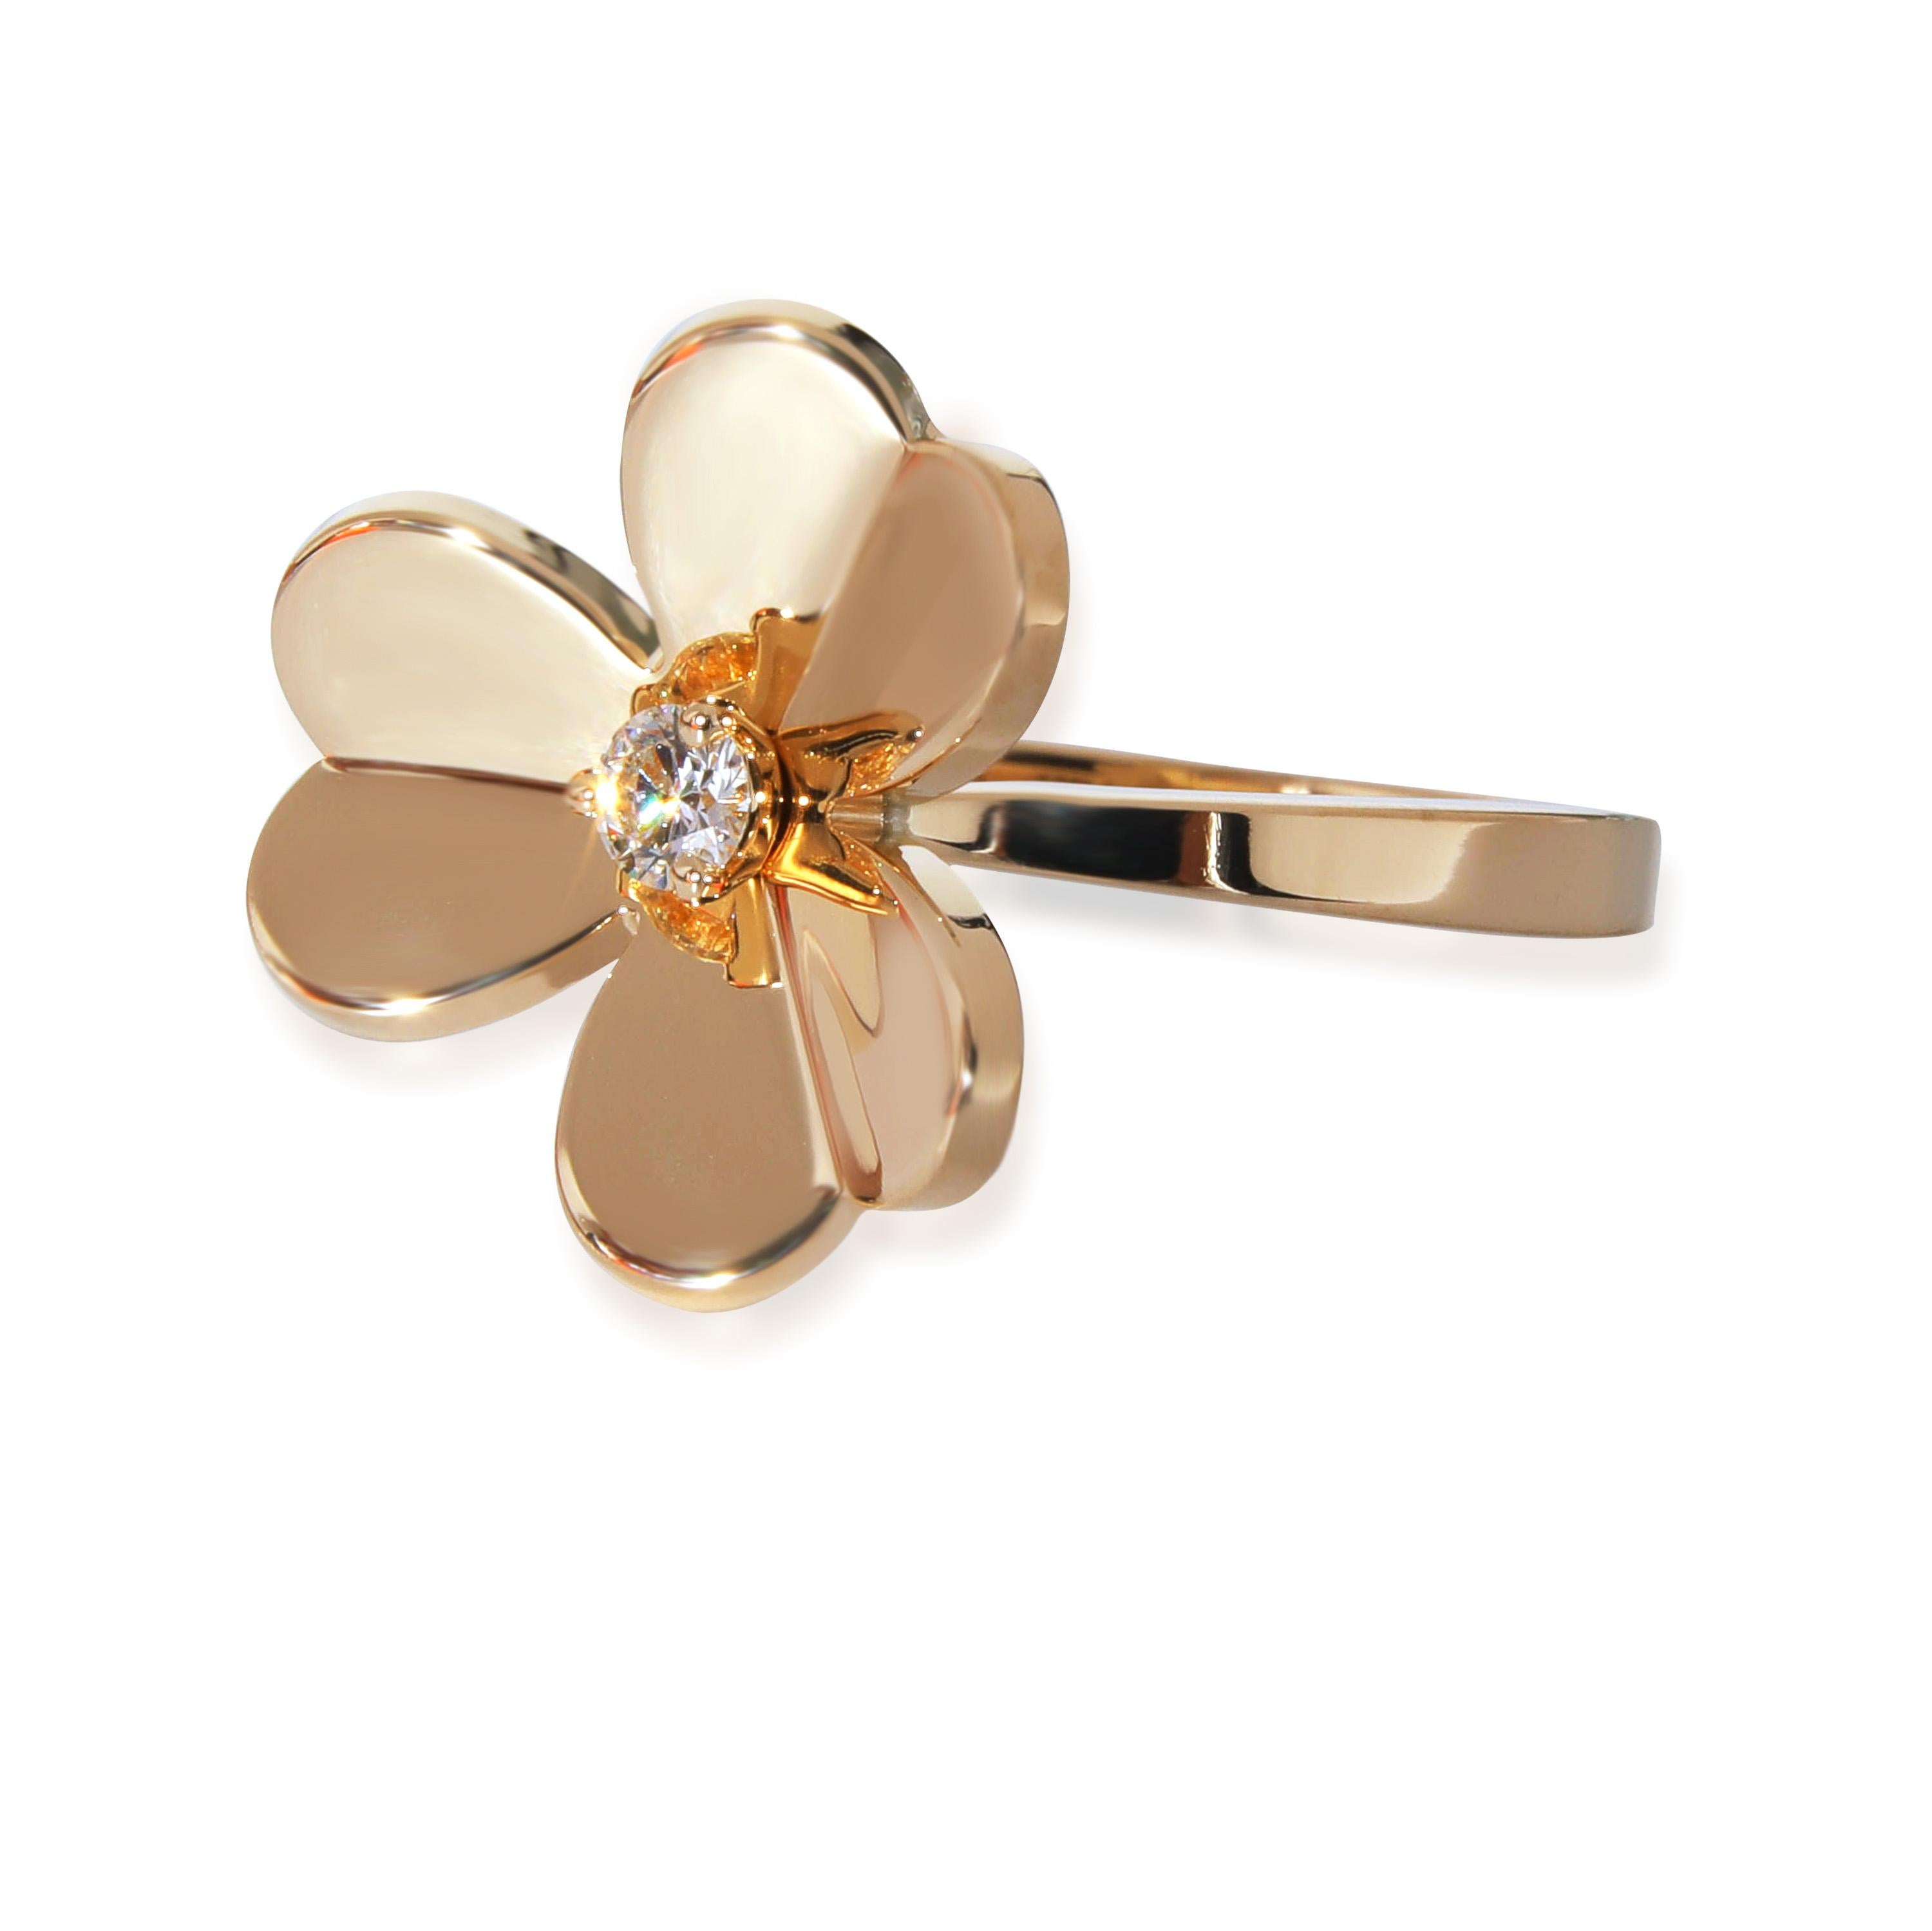 Van Cleef & Arpels Frivole Ring in 18k Yellow Gold 0.09 CTW, Small Model In Excellent Condition For Sale In New York, NY